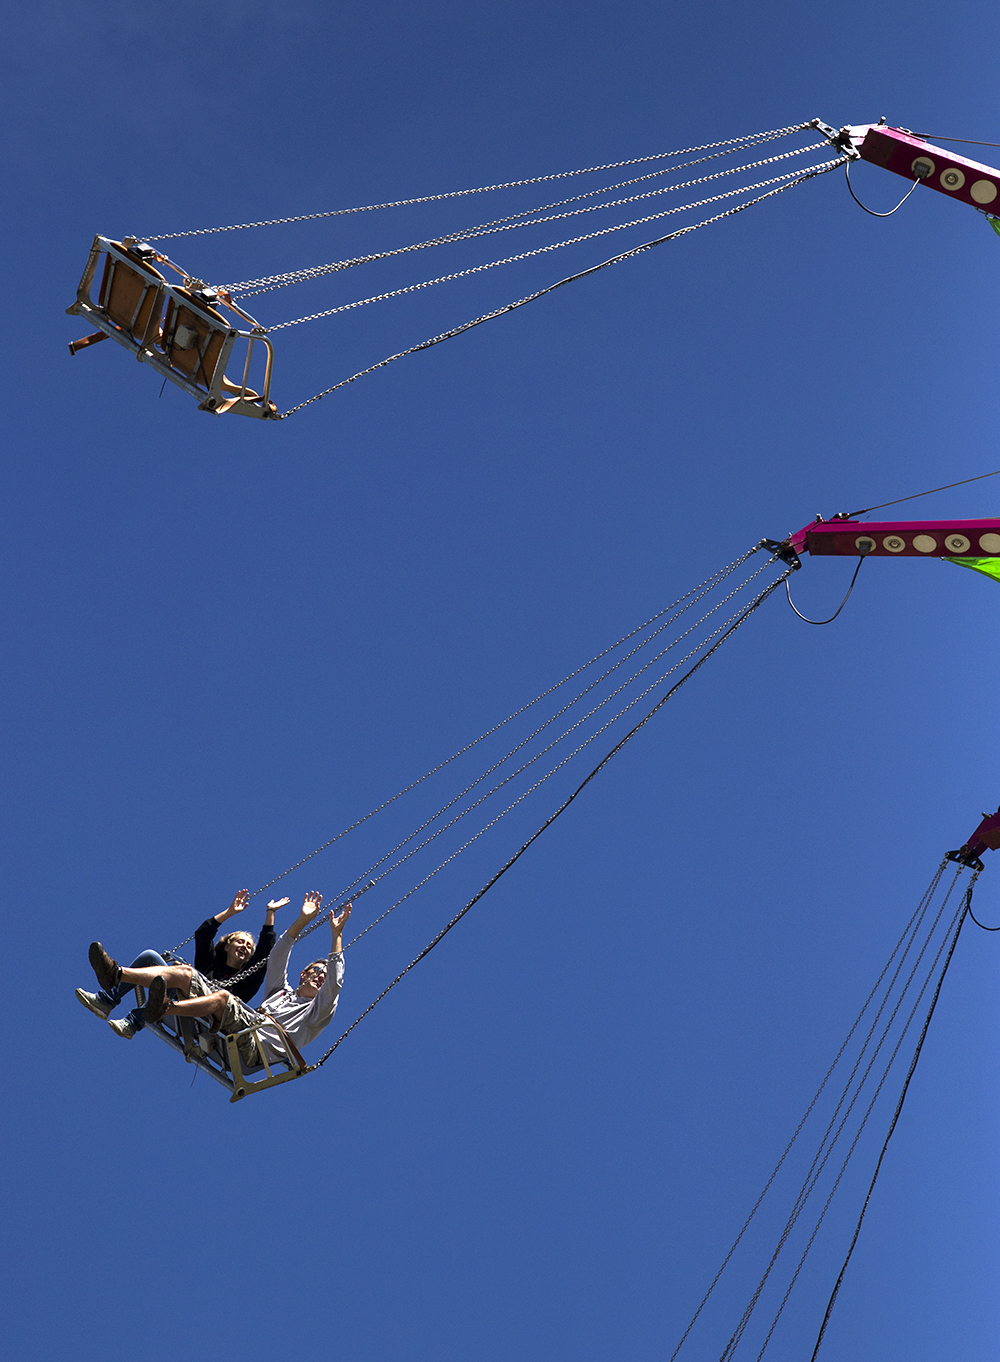 Over the weekend, adults relived their childhoods on the giant swings at the annual Sandwich Fair, the oldest county fair in Illinois.  